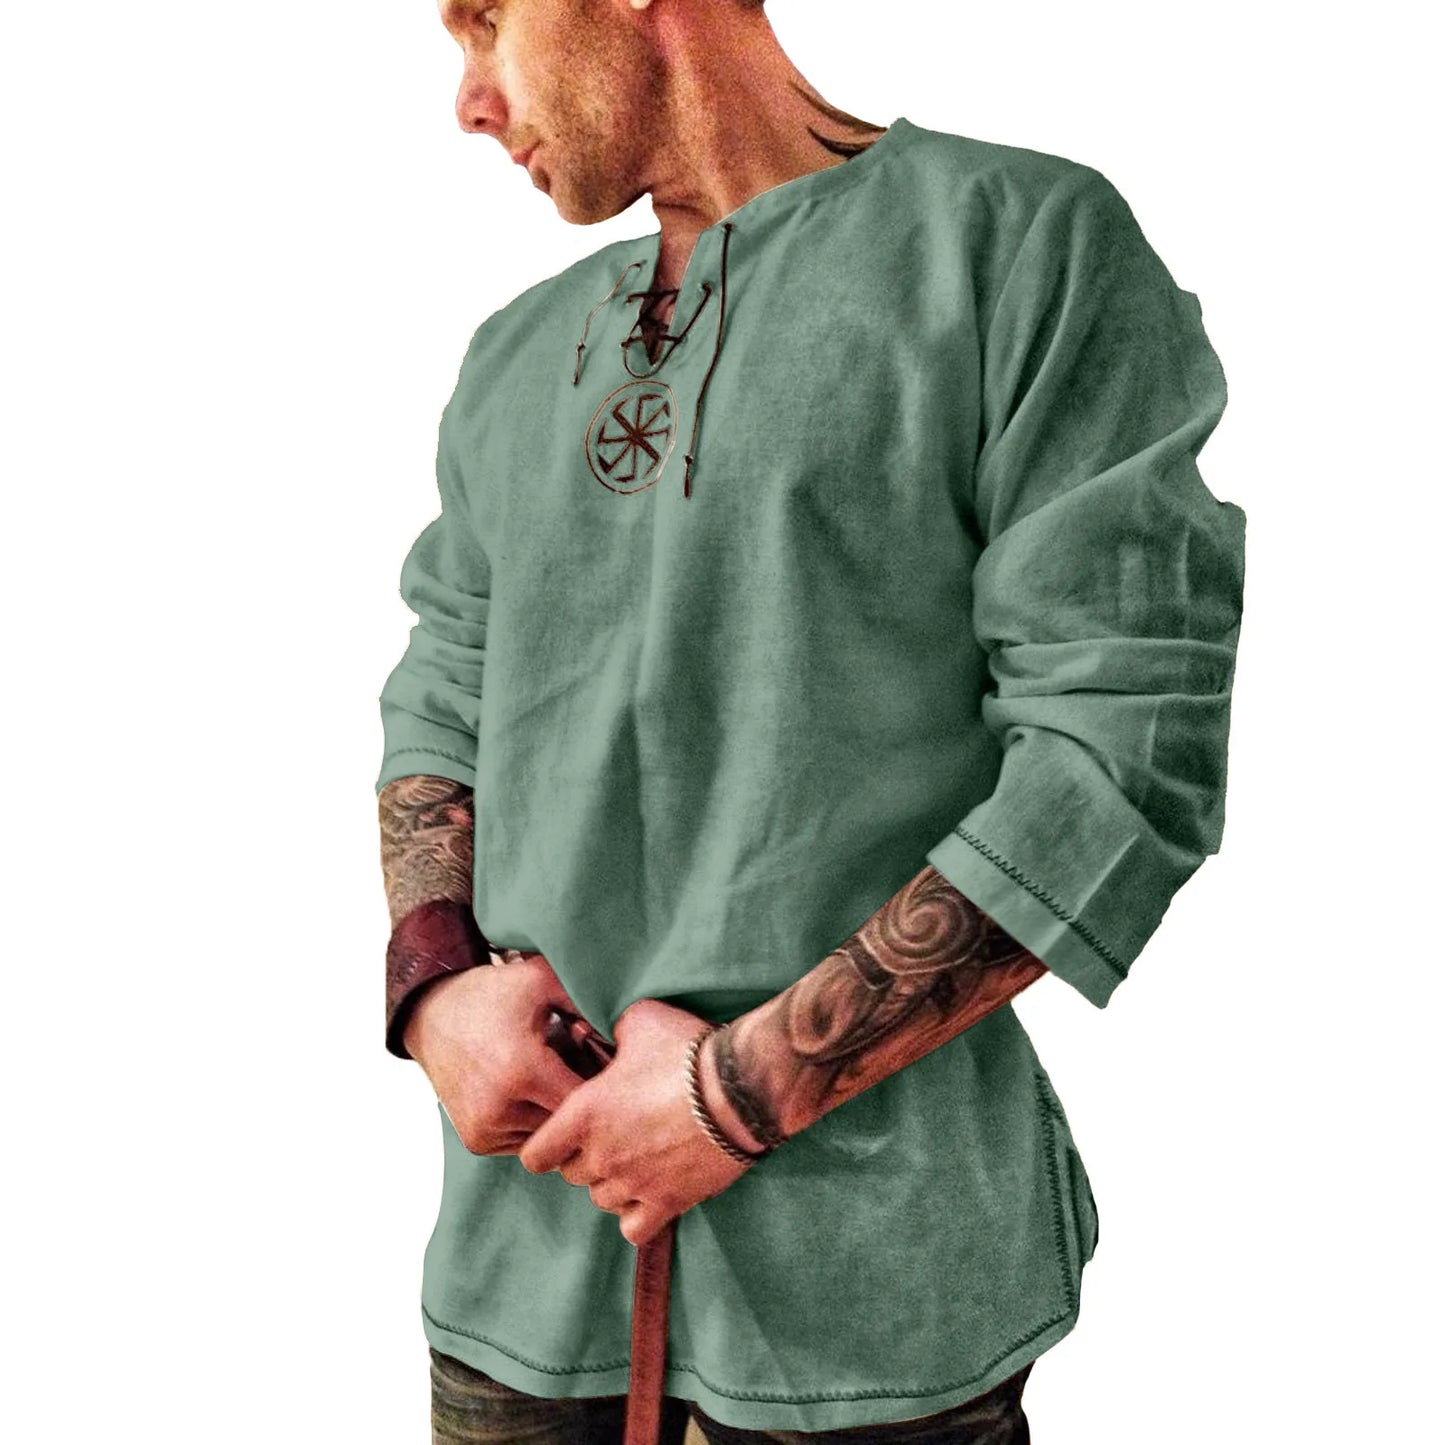 Spring Summer Men's Fashion T-Shirt Long Sleeve/Breathable Lace-Up Cotton And Linen Tee